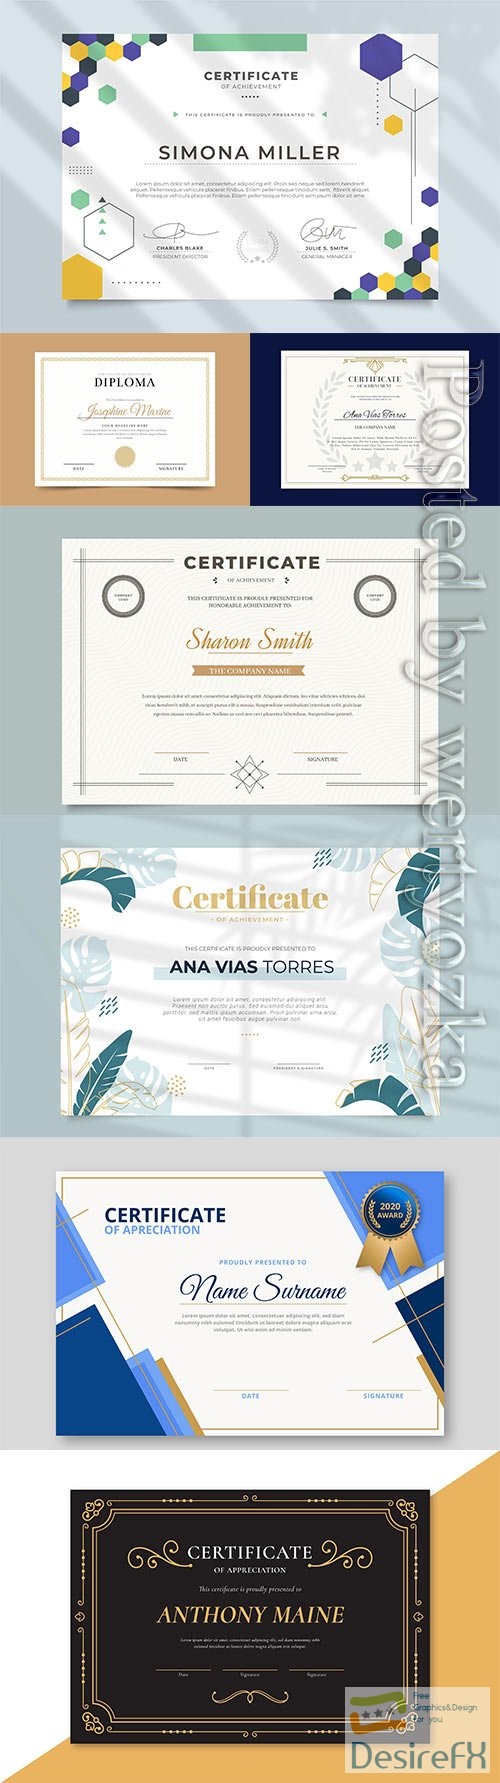 Diplomas and certificates in vector